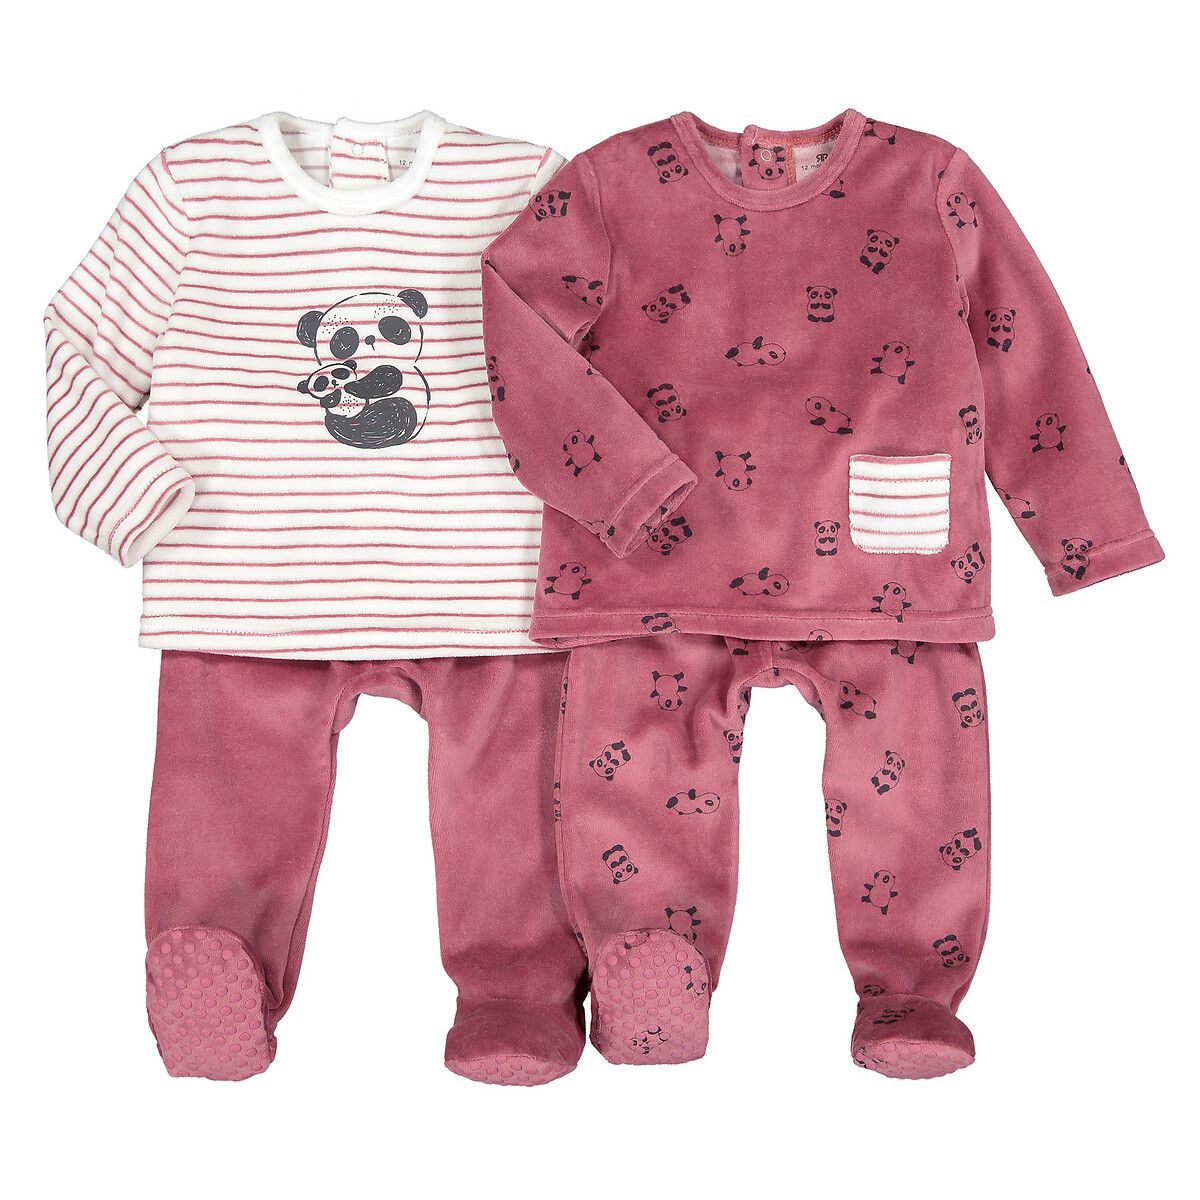 Pack Of 2 Velour Pyjamas In Cotton Mix 6 Months 4 Years Ecru Pink La Redoute Collections La Redoute